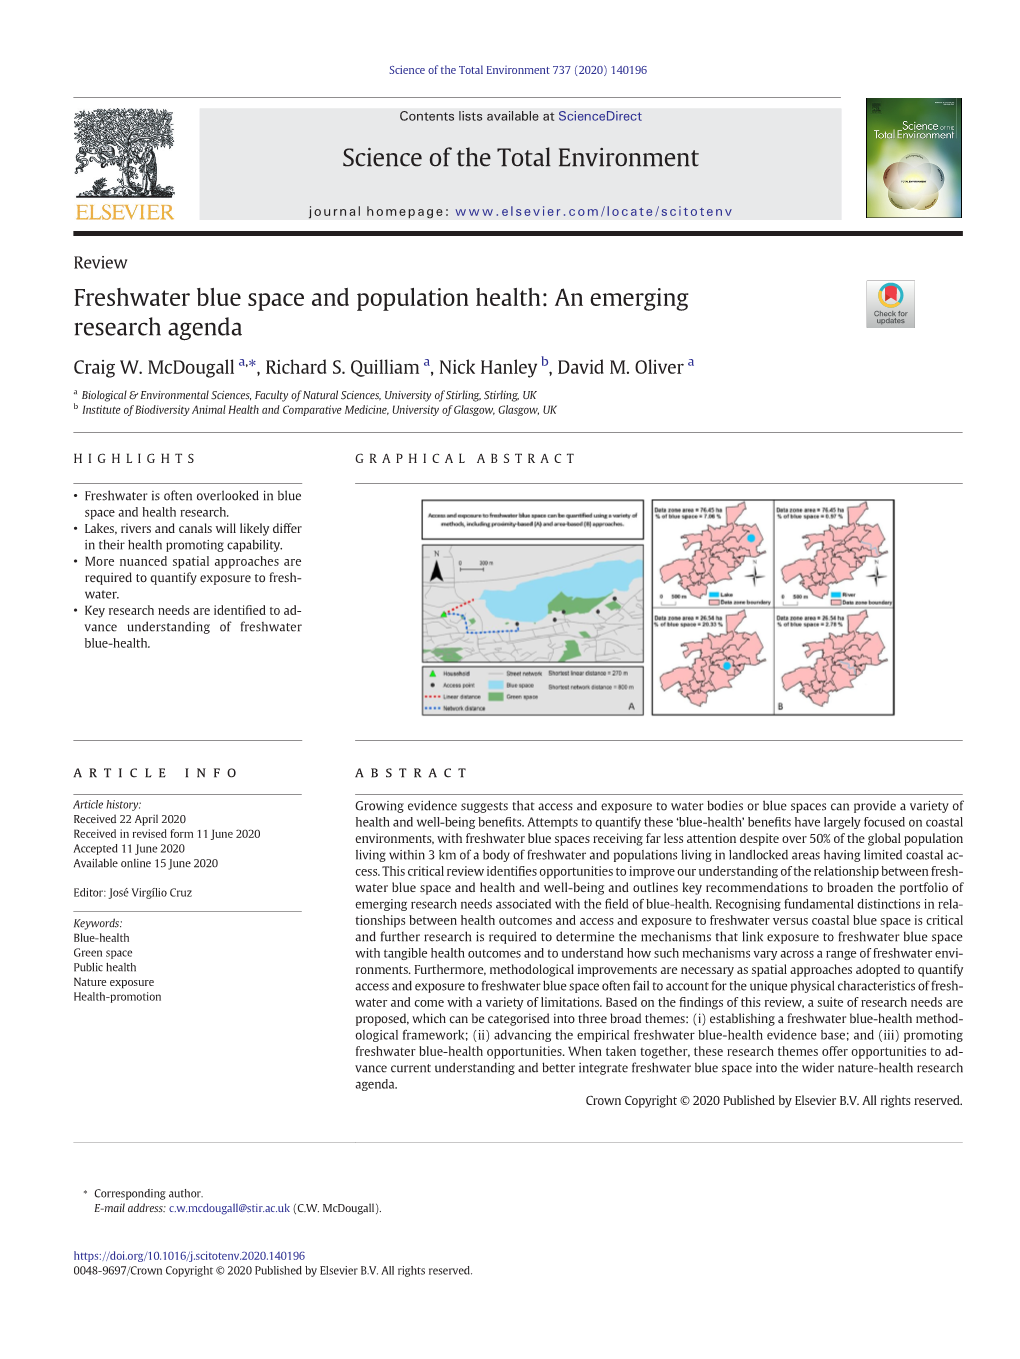 Freshwater Blue Space and Population Health: an Emerging Research Agenda